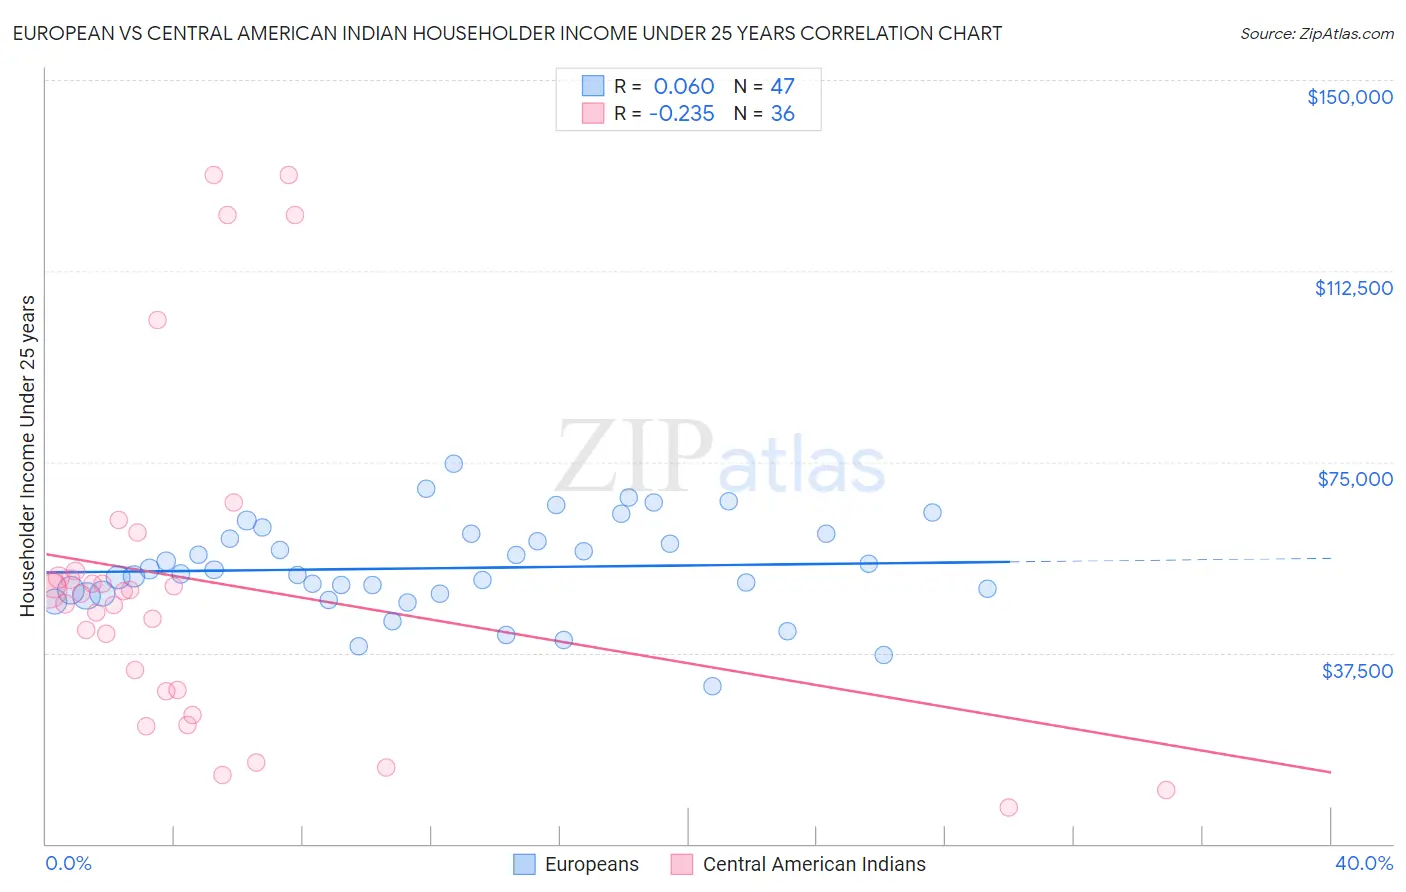 European vs Central American Indian Householder Income Under 25 years